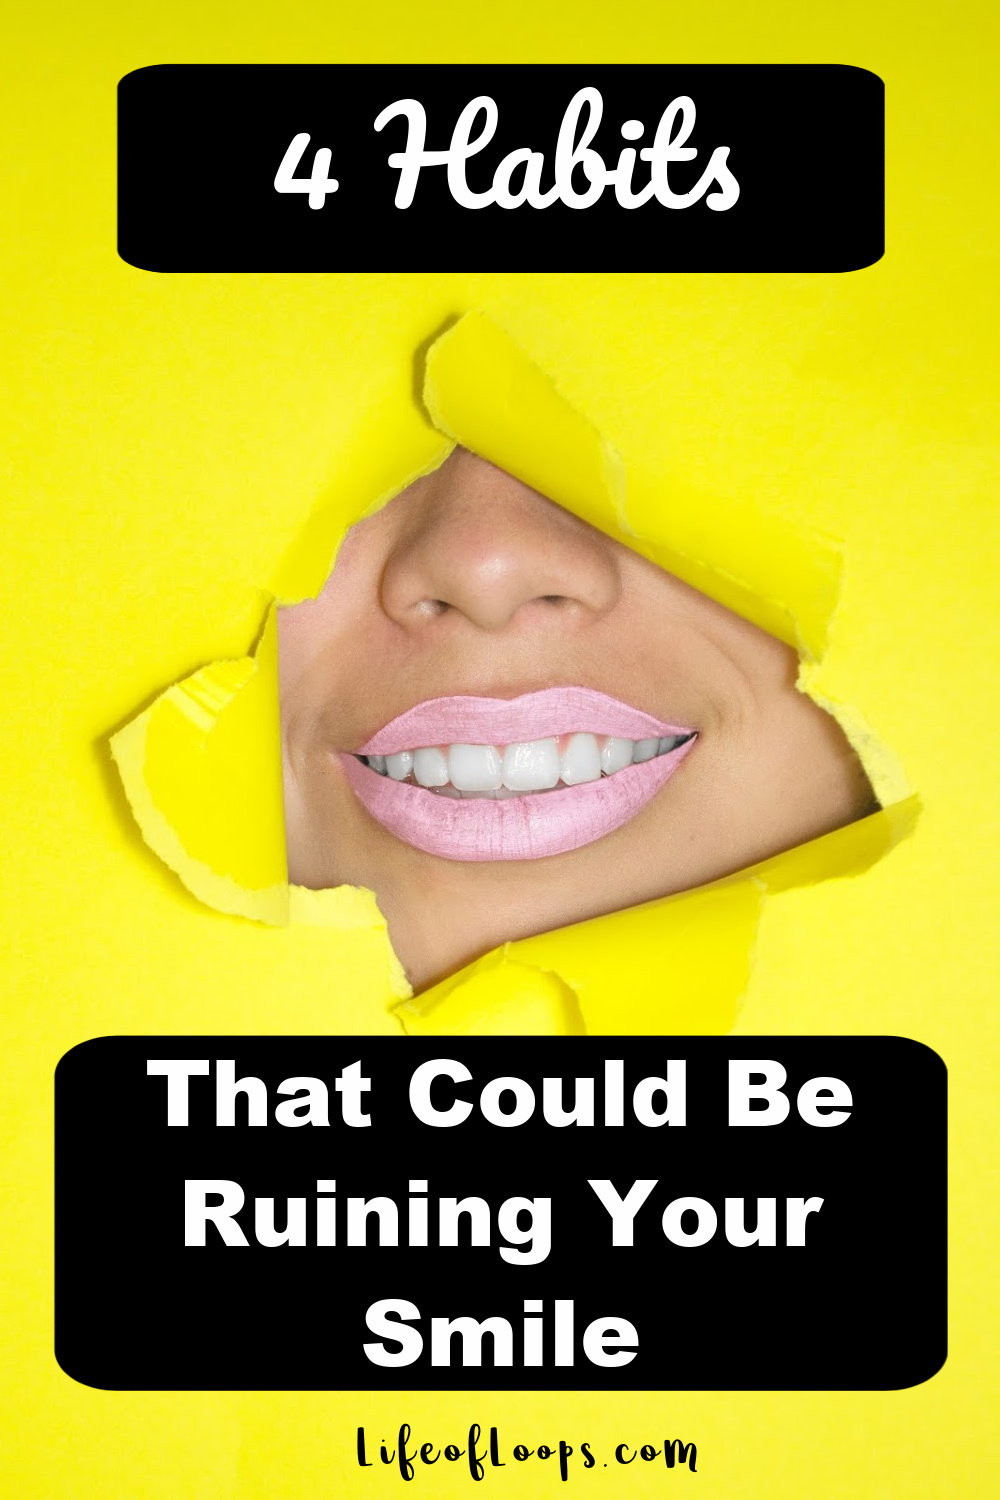 4 Habits That Could Be Ruining Your Smile!